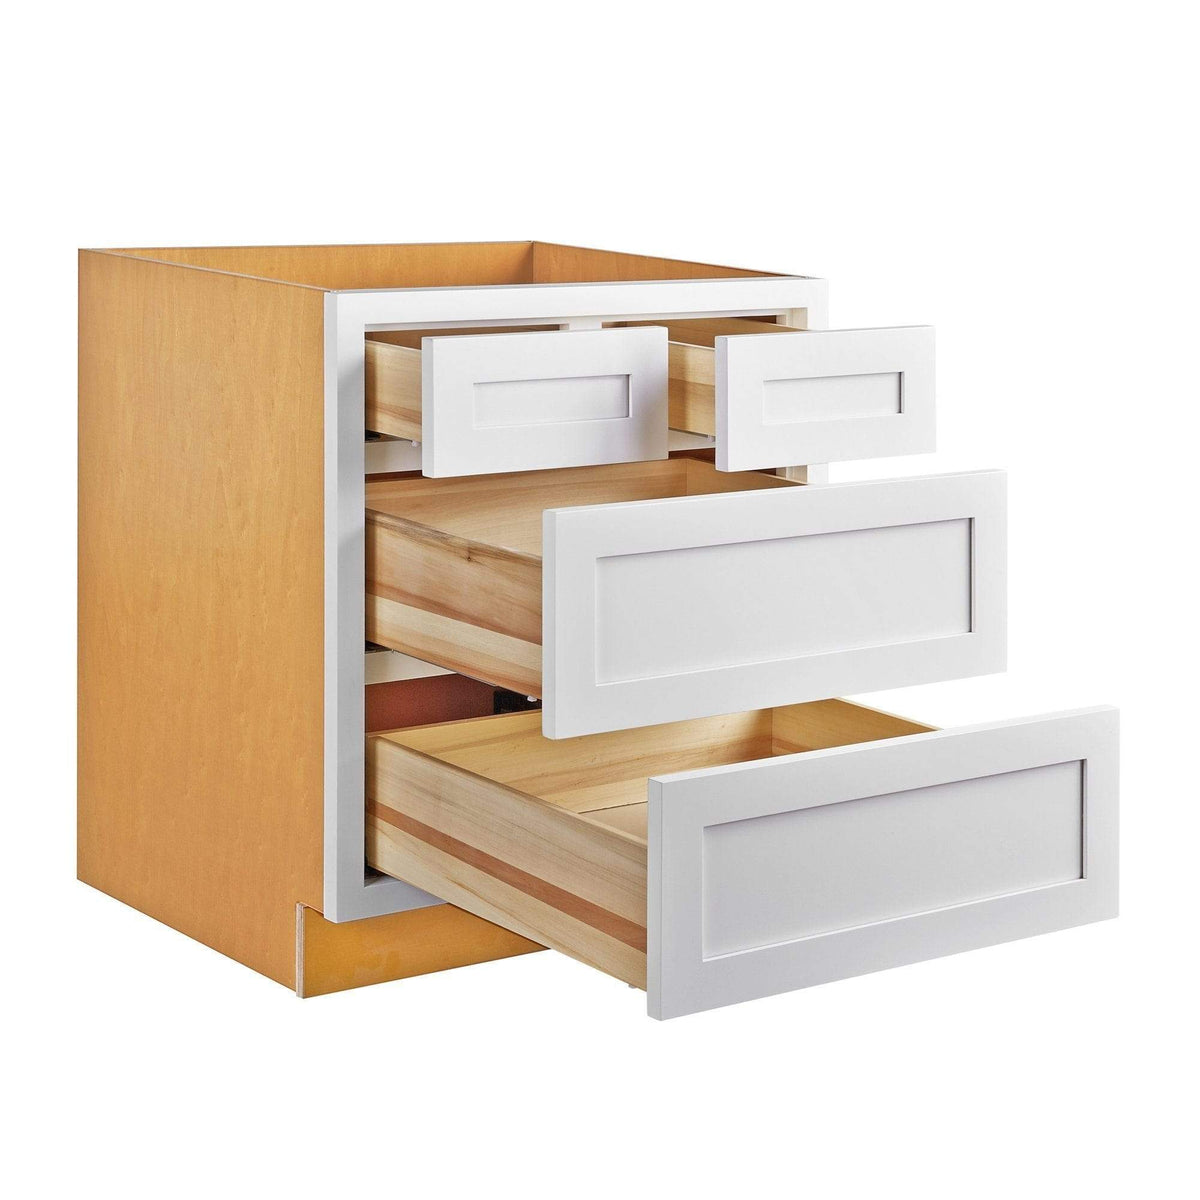 inset snow white cabinet